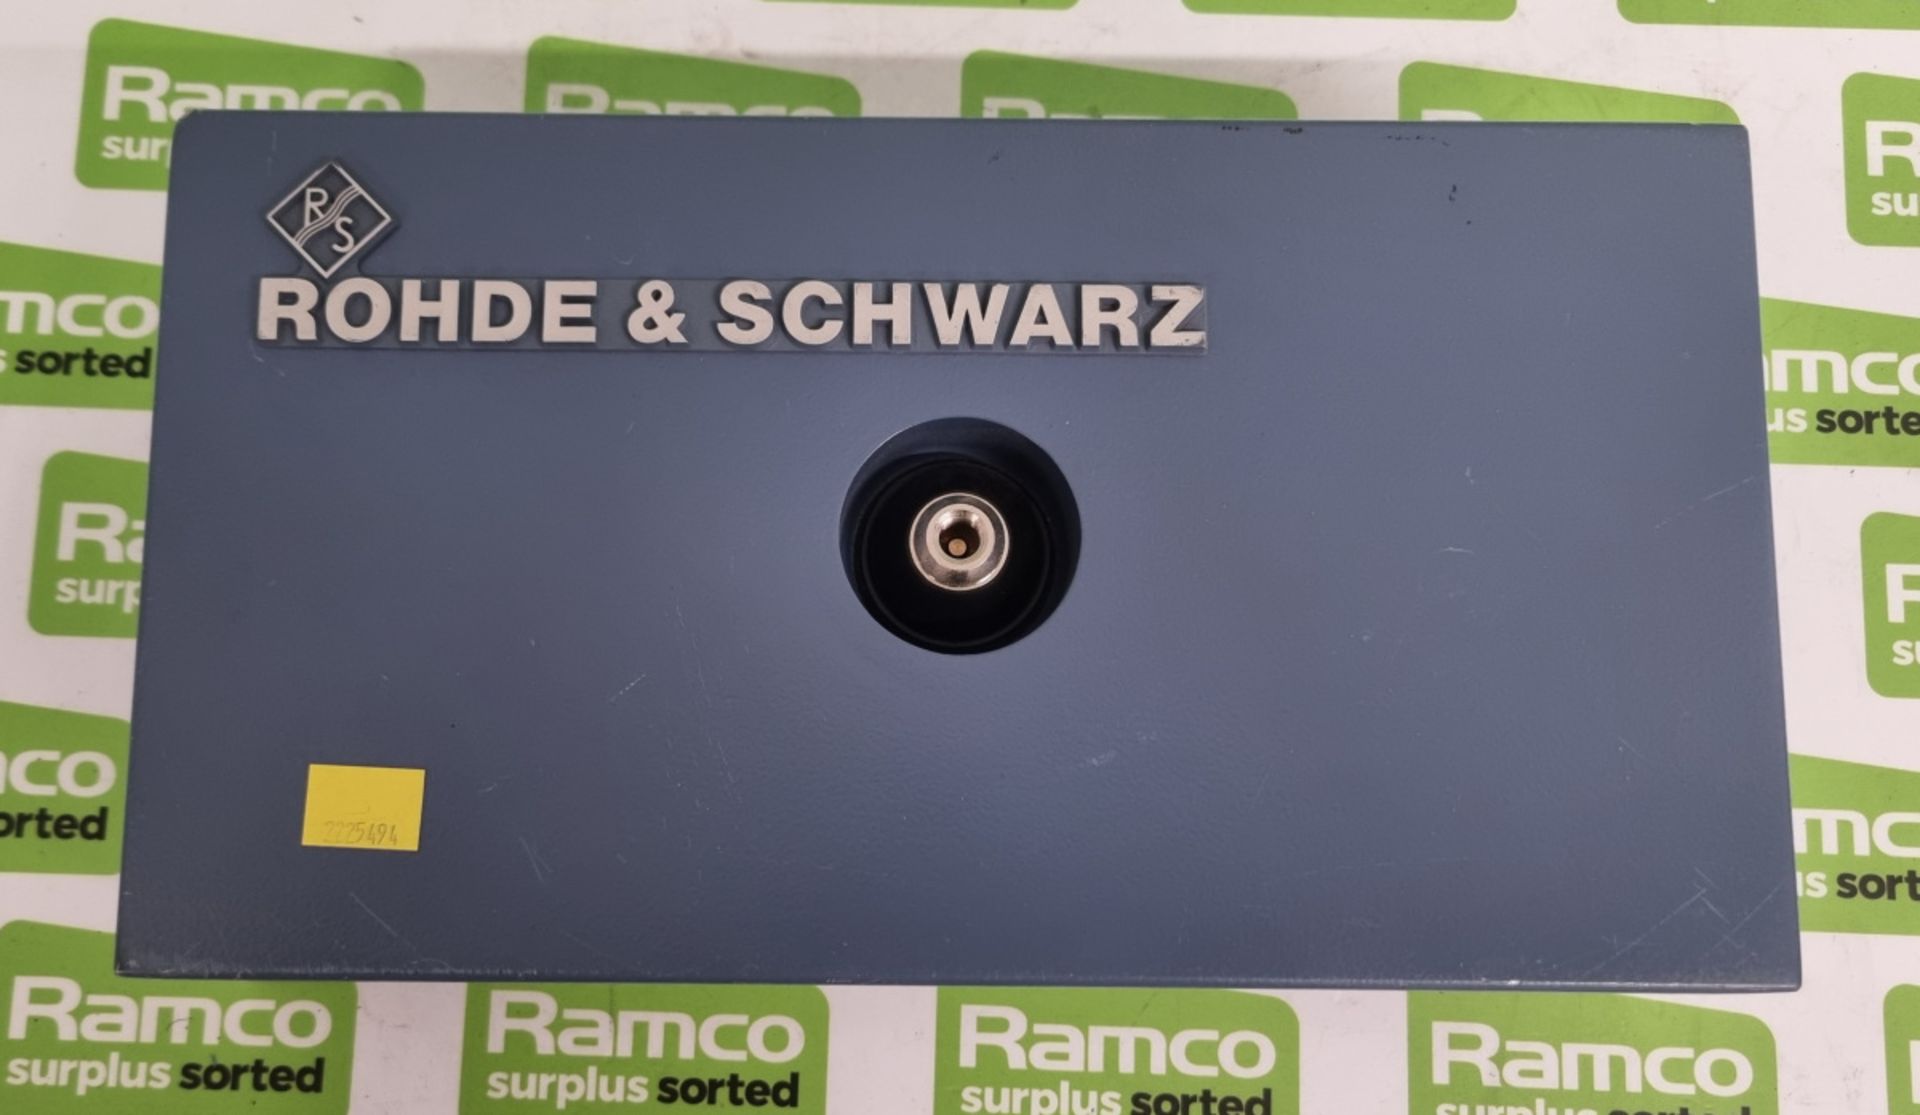 Rohde & Schwarz CMS33 Radiocommunication Service Monitor 0.4 - 1000mhz - 840.0009.34 with carry case - Image 10 of 12